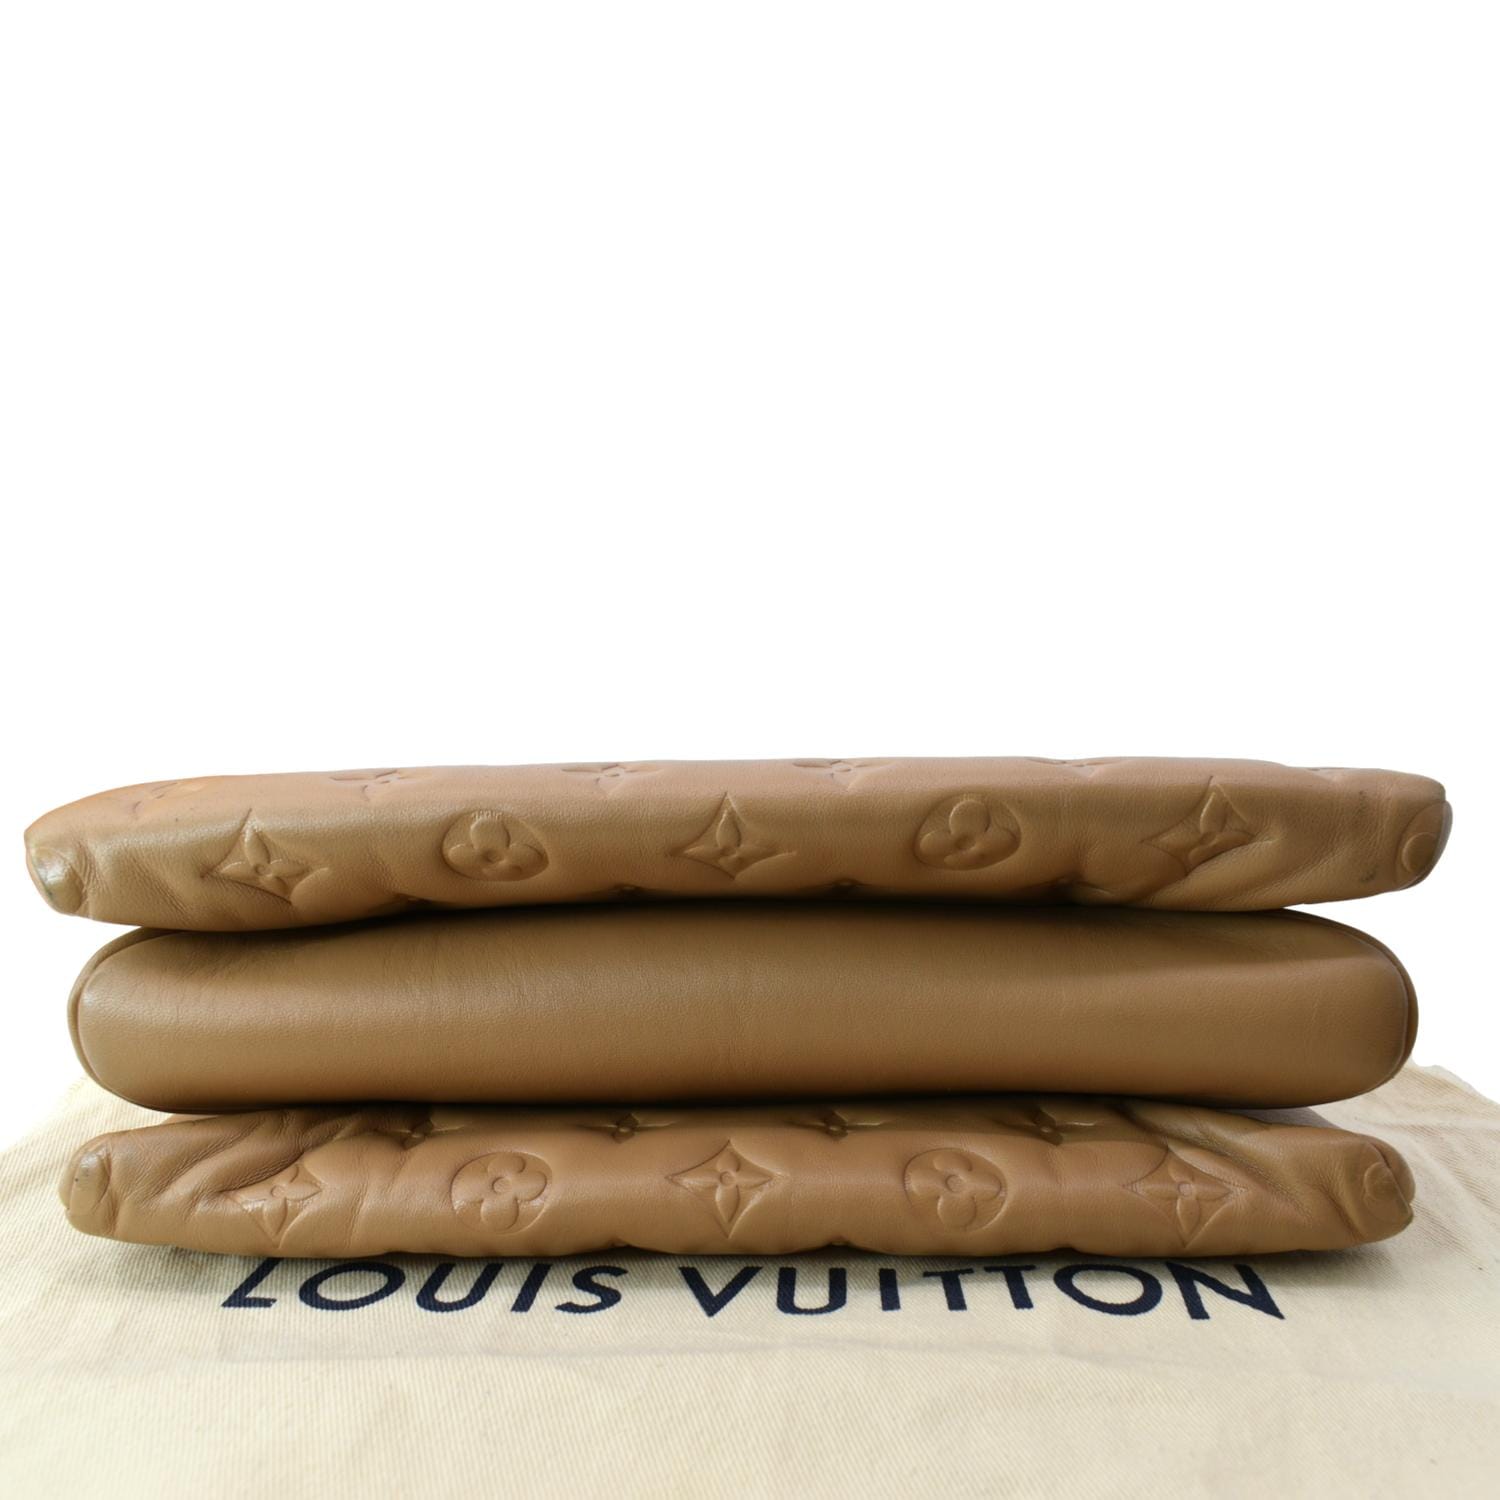 Louis Vuitton Coussin PM, Camel, Preowned in Box WA001 - Julia